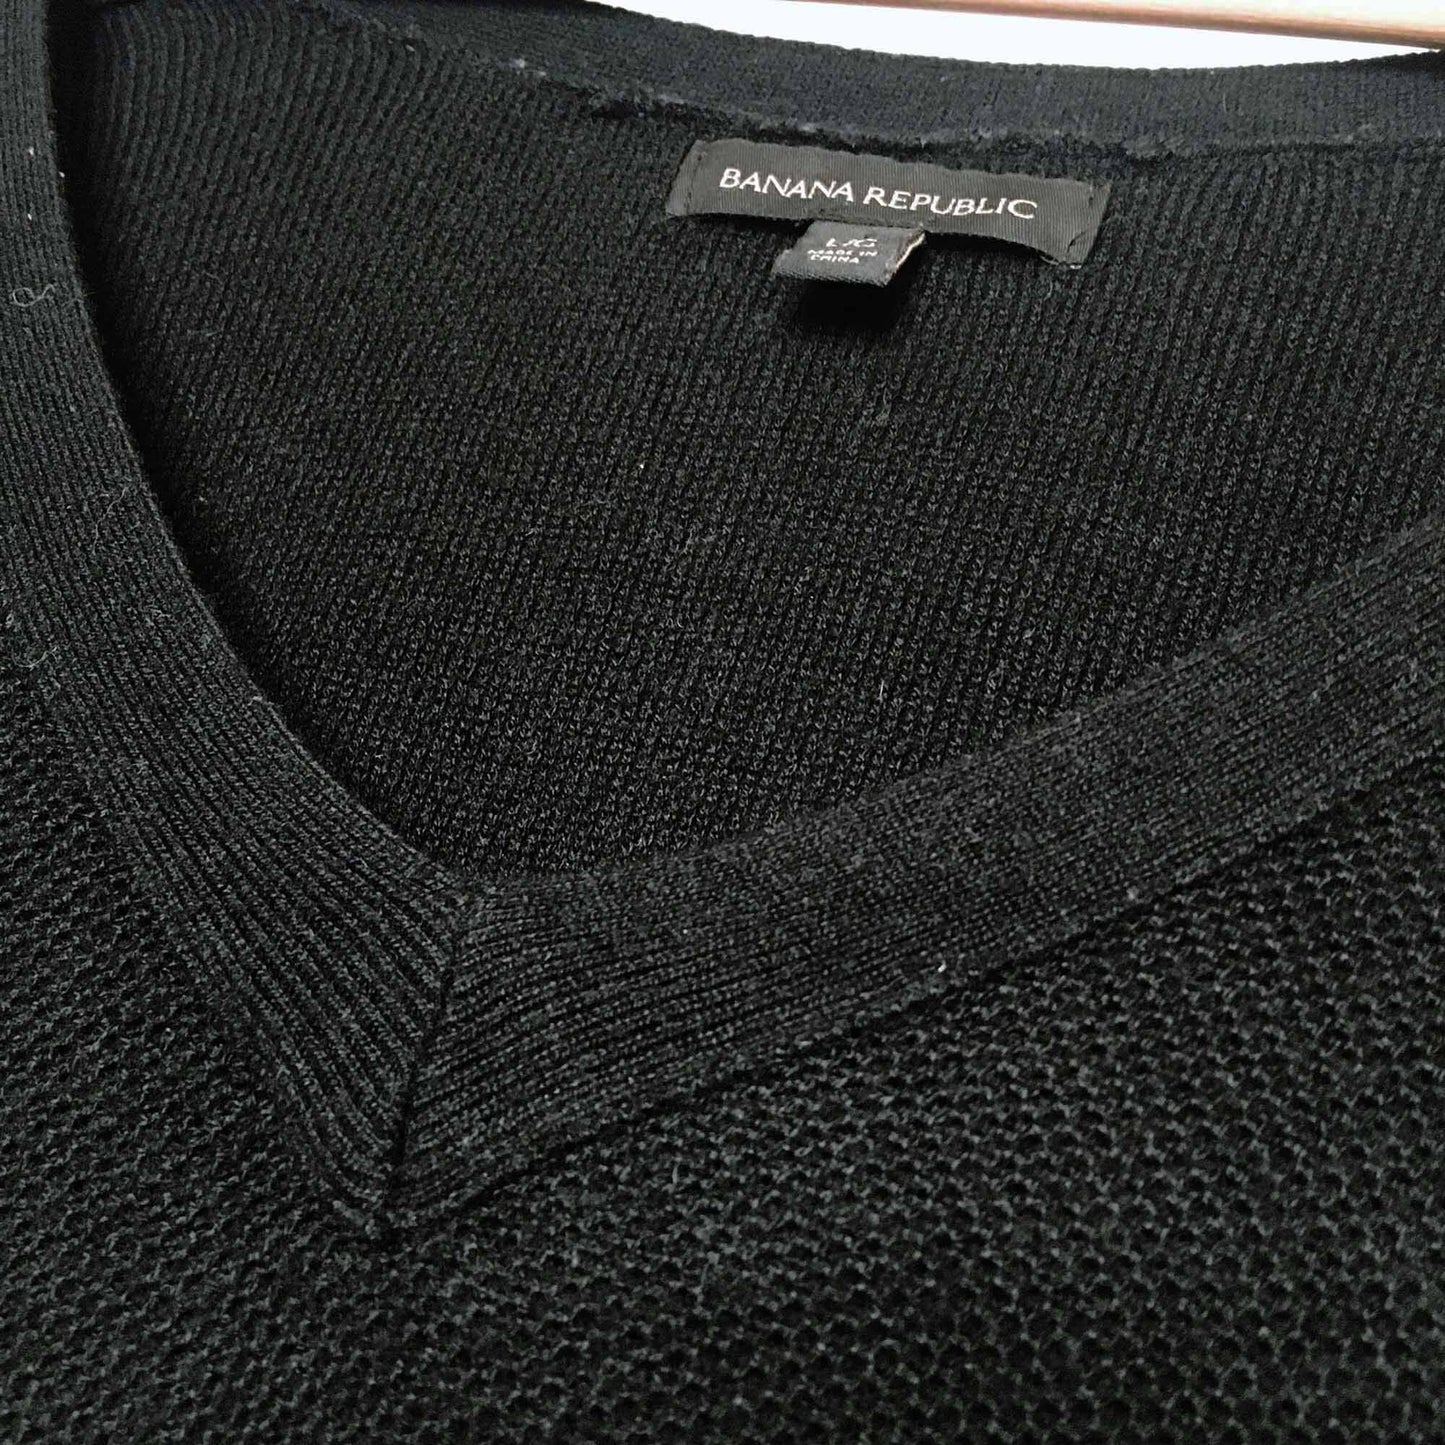 Banana Republic merino wool-blend sweater with elbow patches - size Large